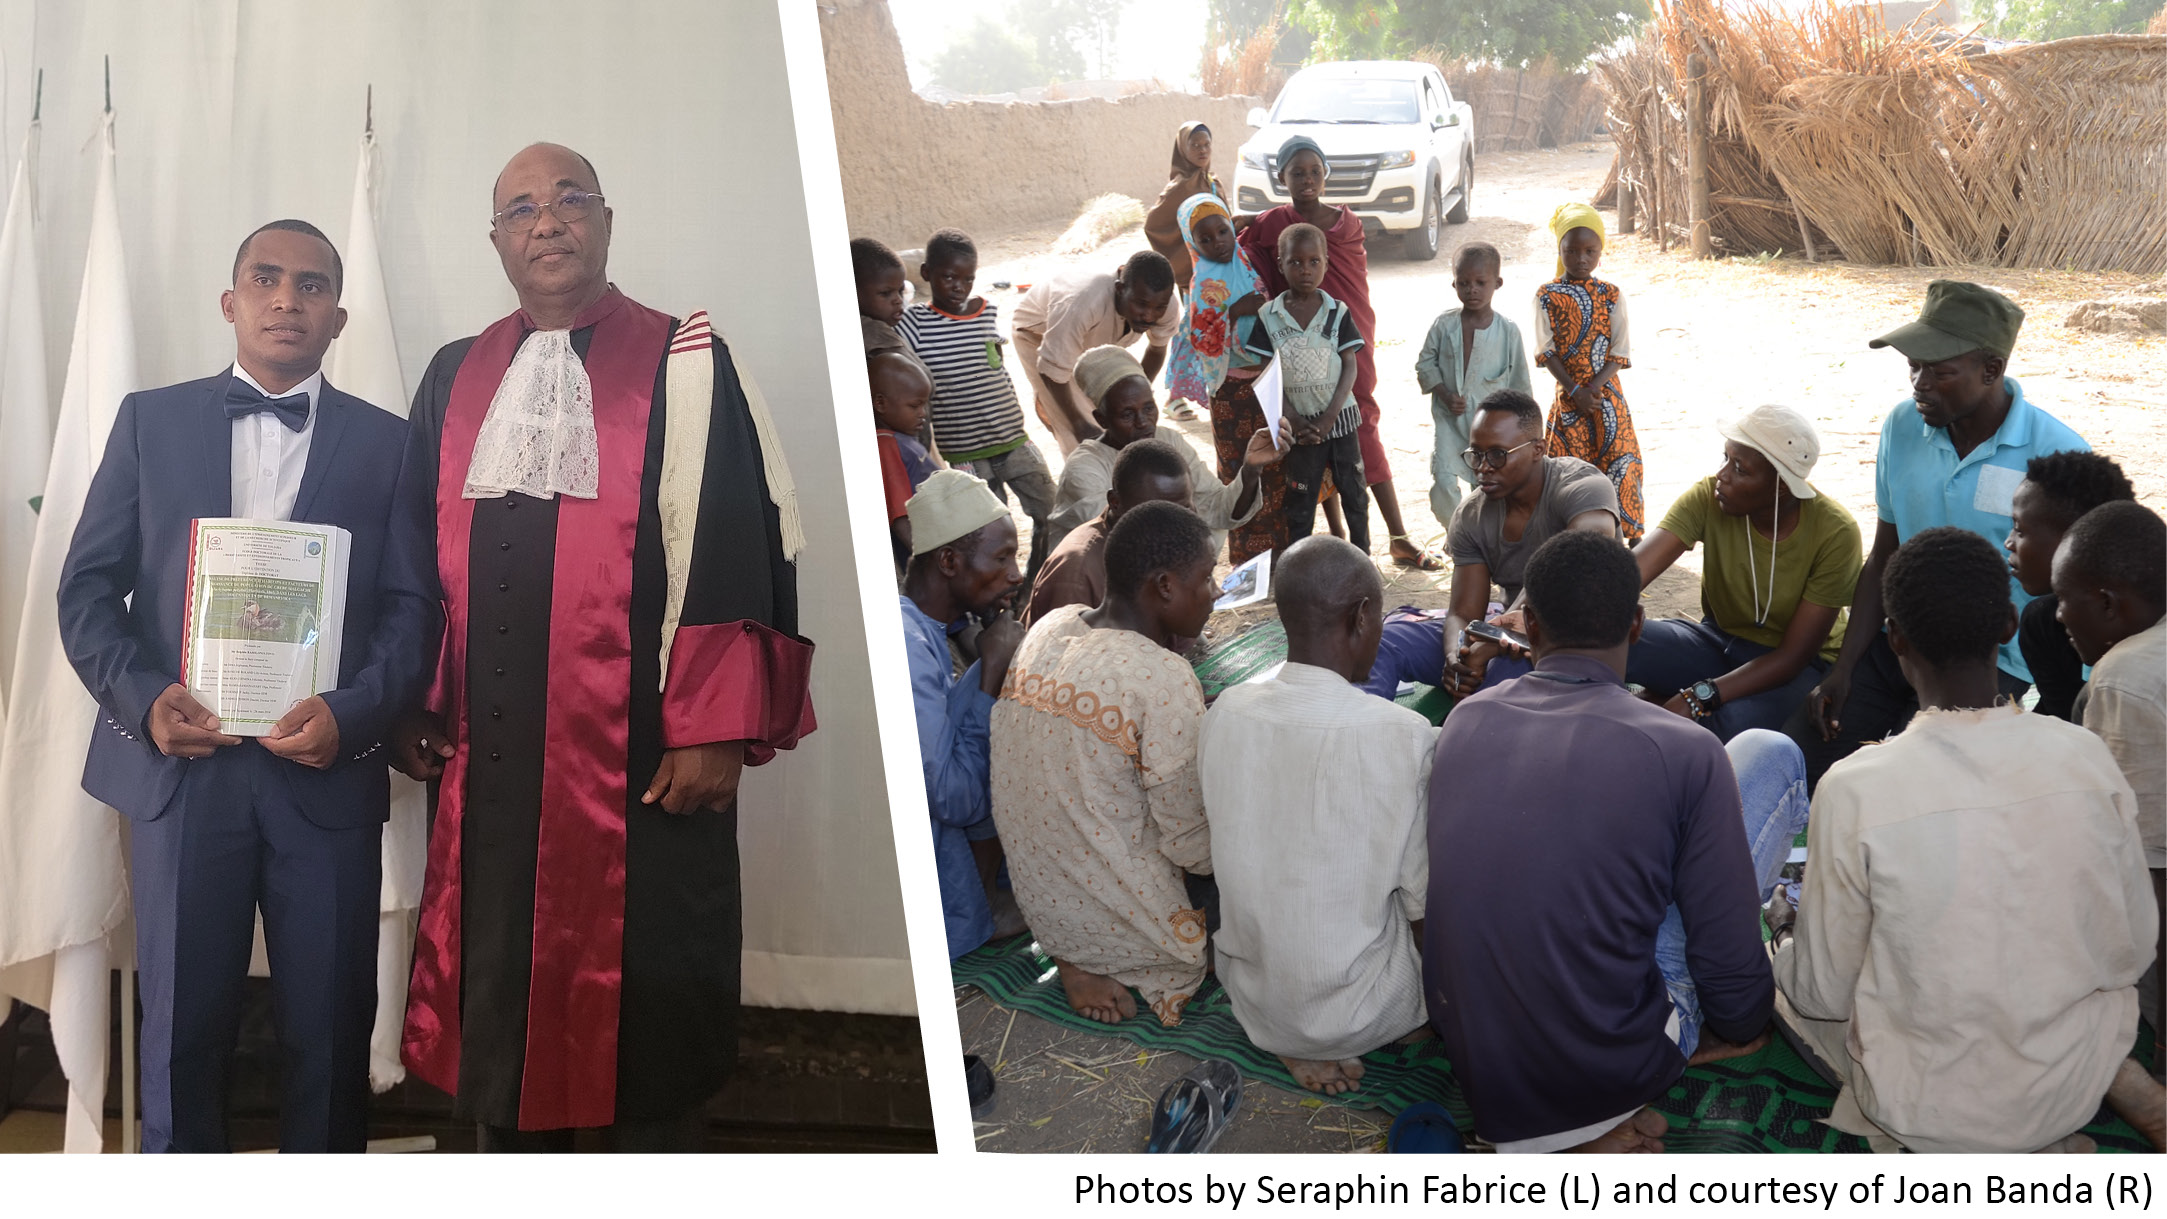 Two photos: left shows a student posing with his diploma and his advisor; right shows a scientist speaking to a community